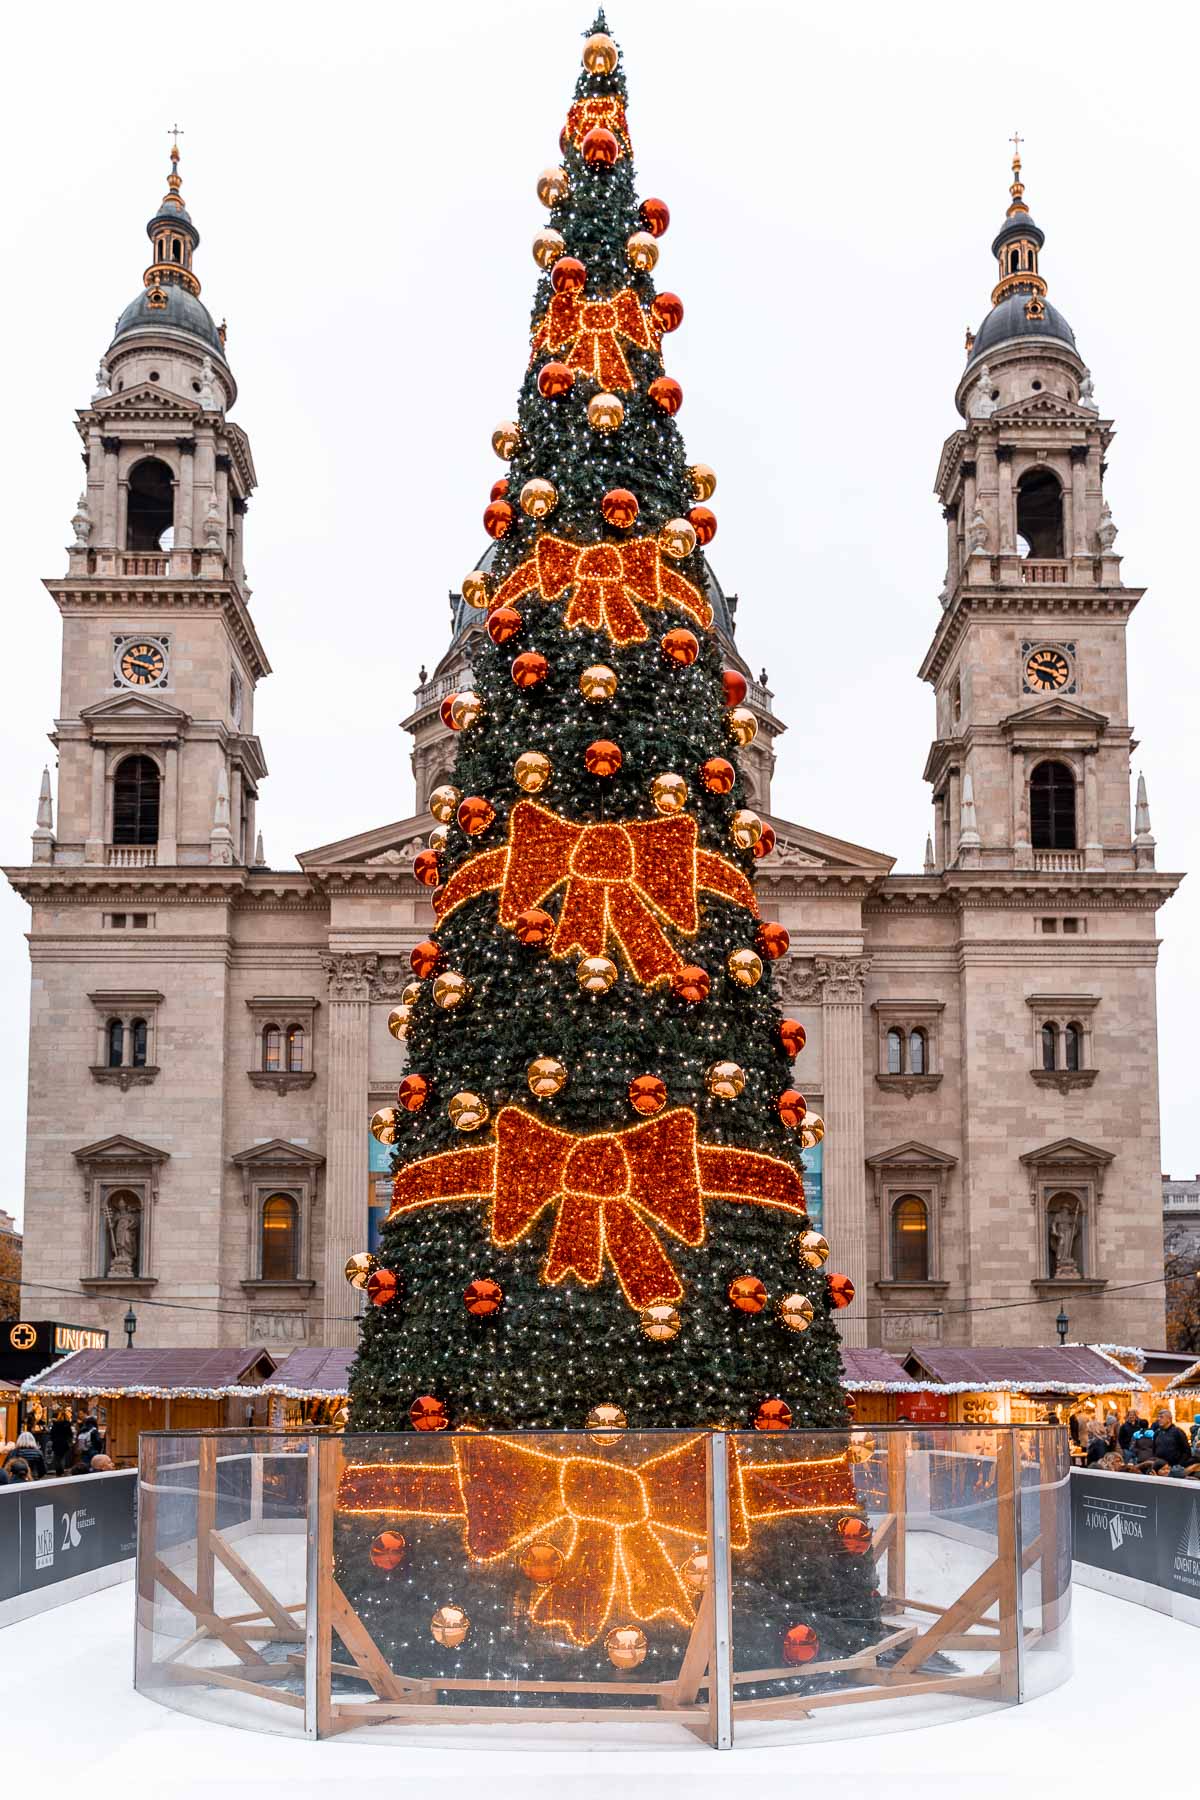 Christmas tree in front of St. Stephen's Basilica in Budapest